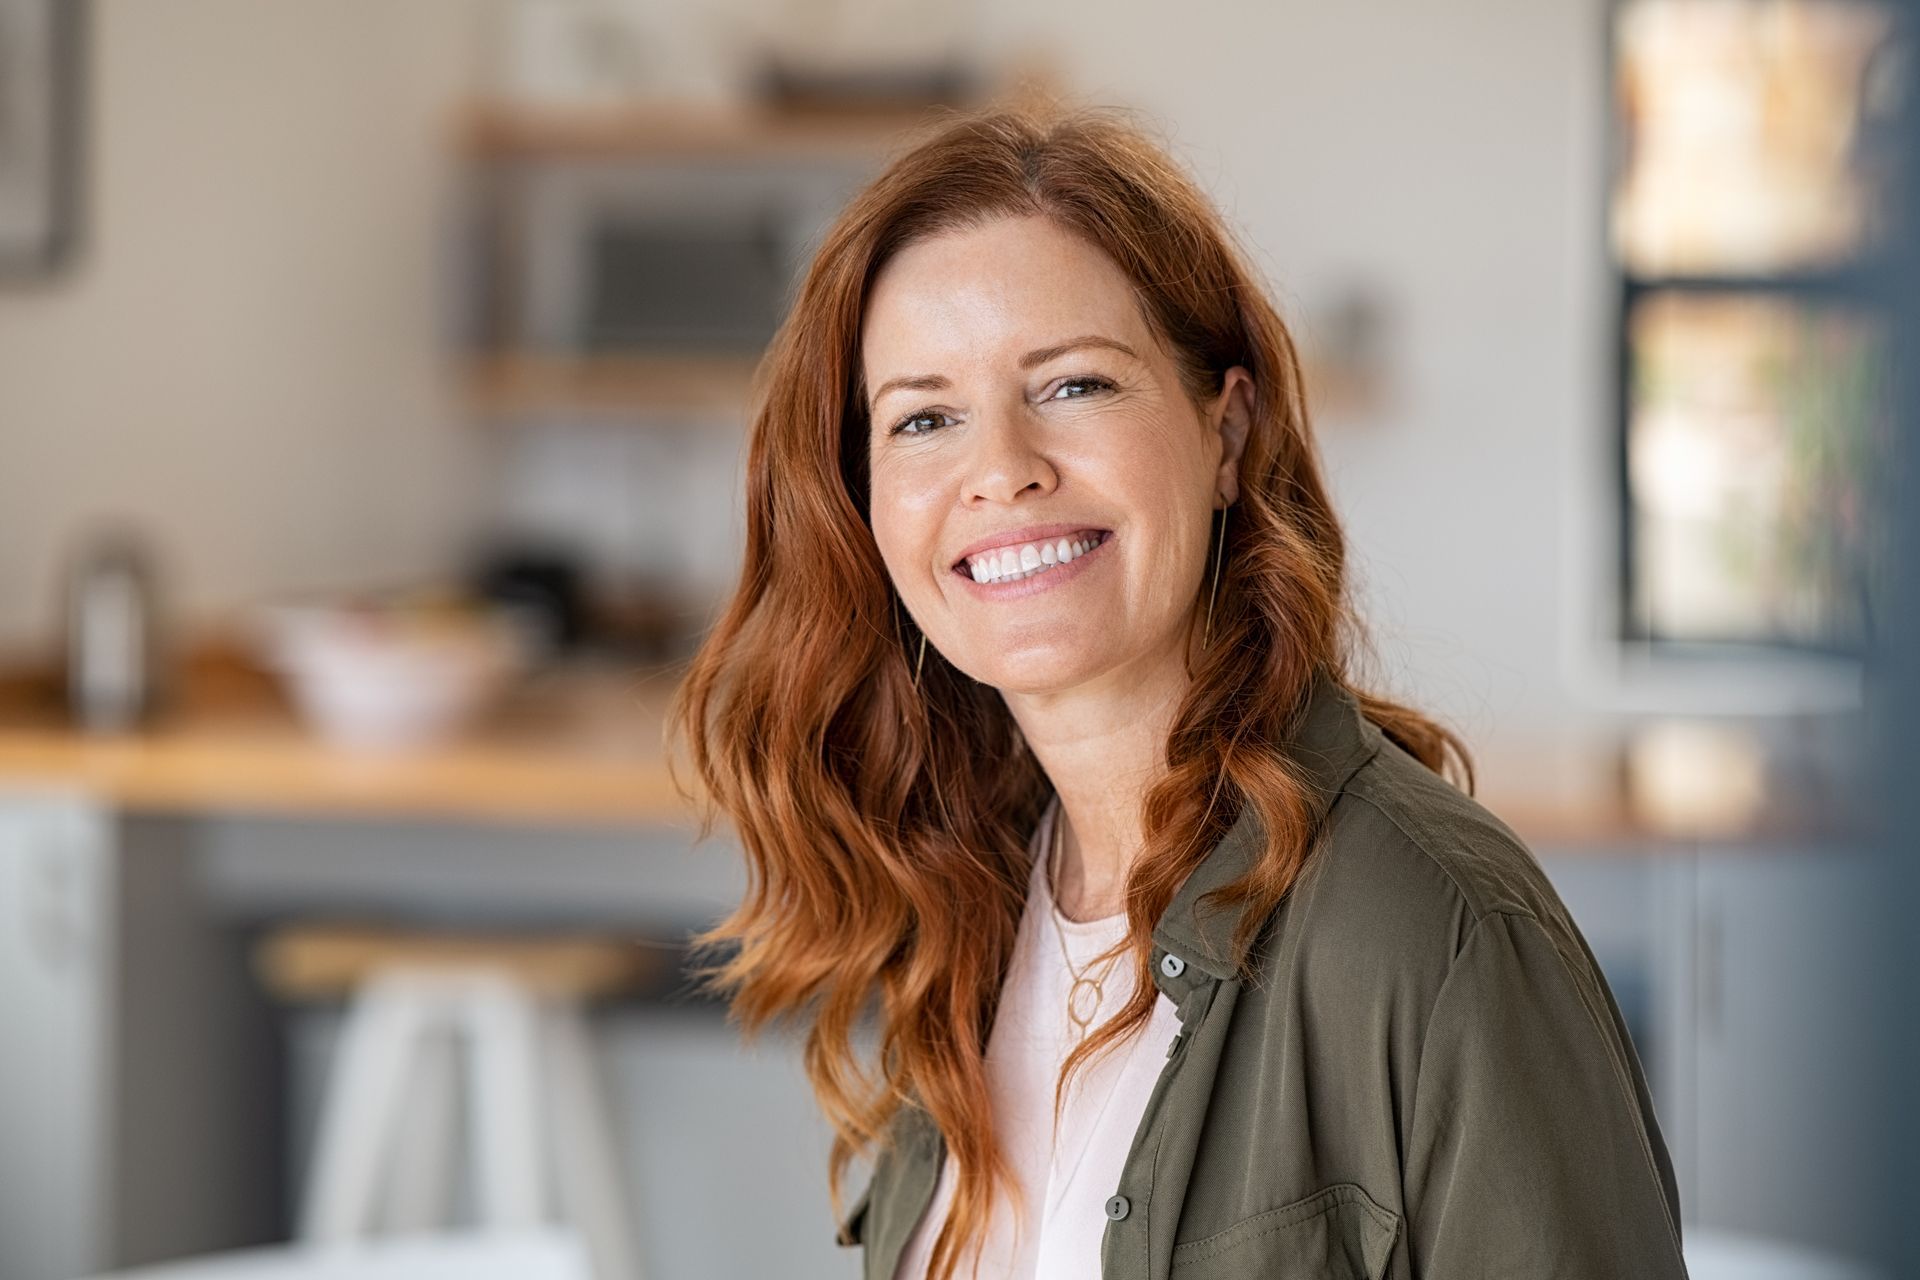 A woman with red hair is smiling for the camera in a kitchen